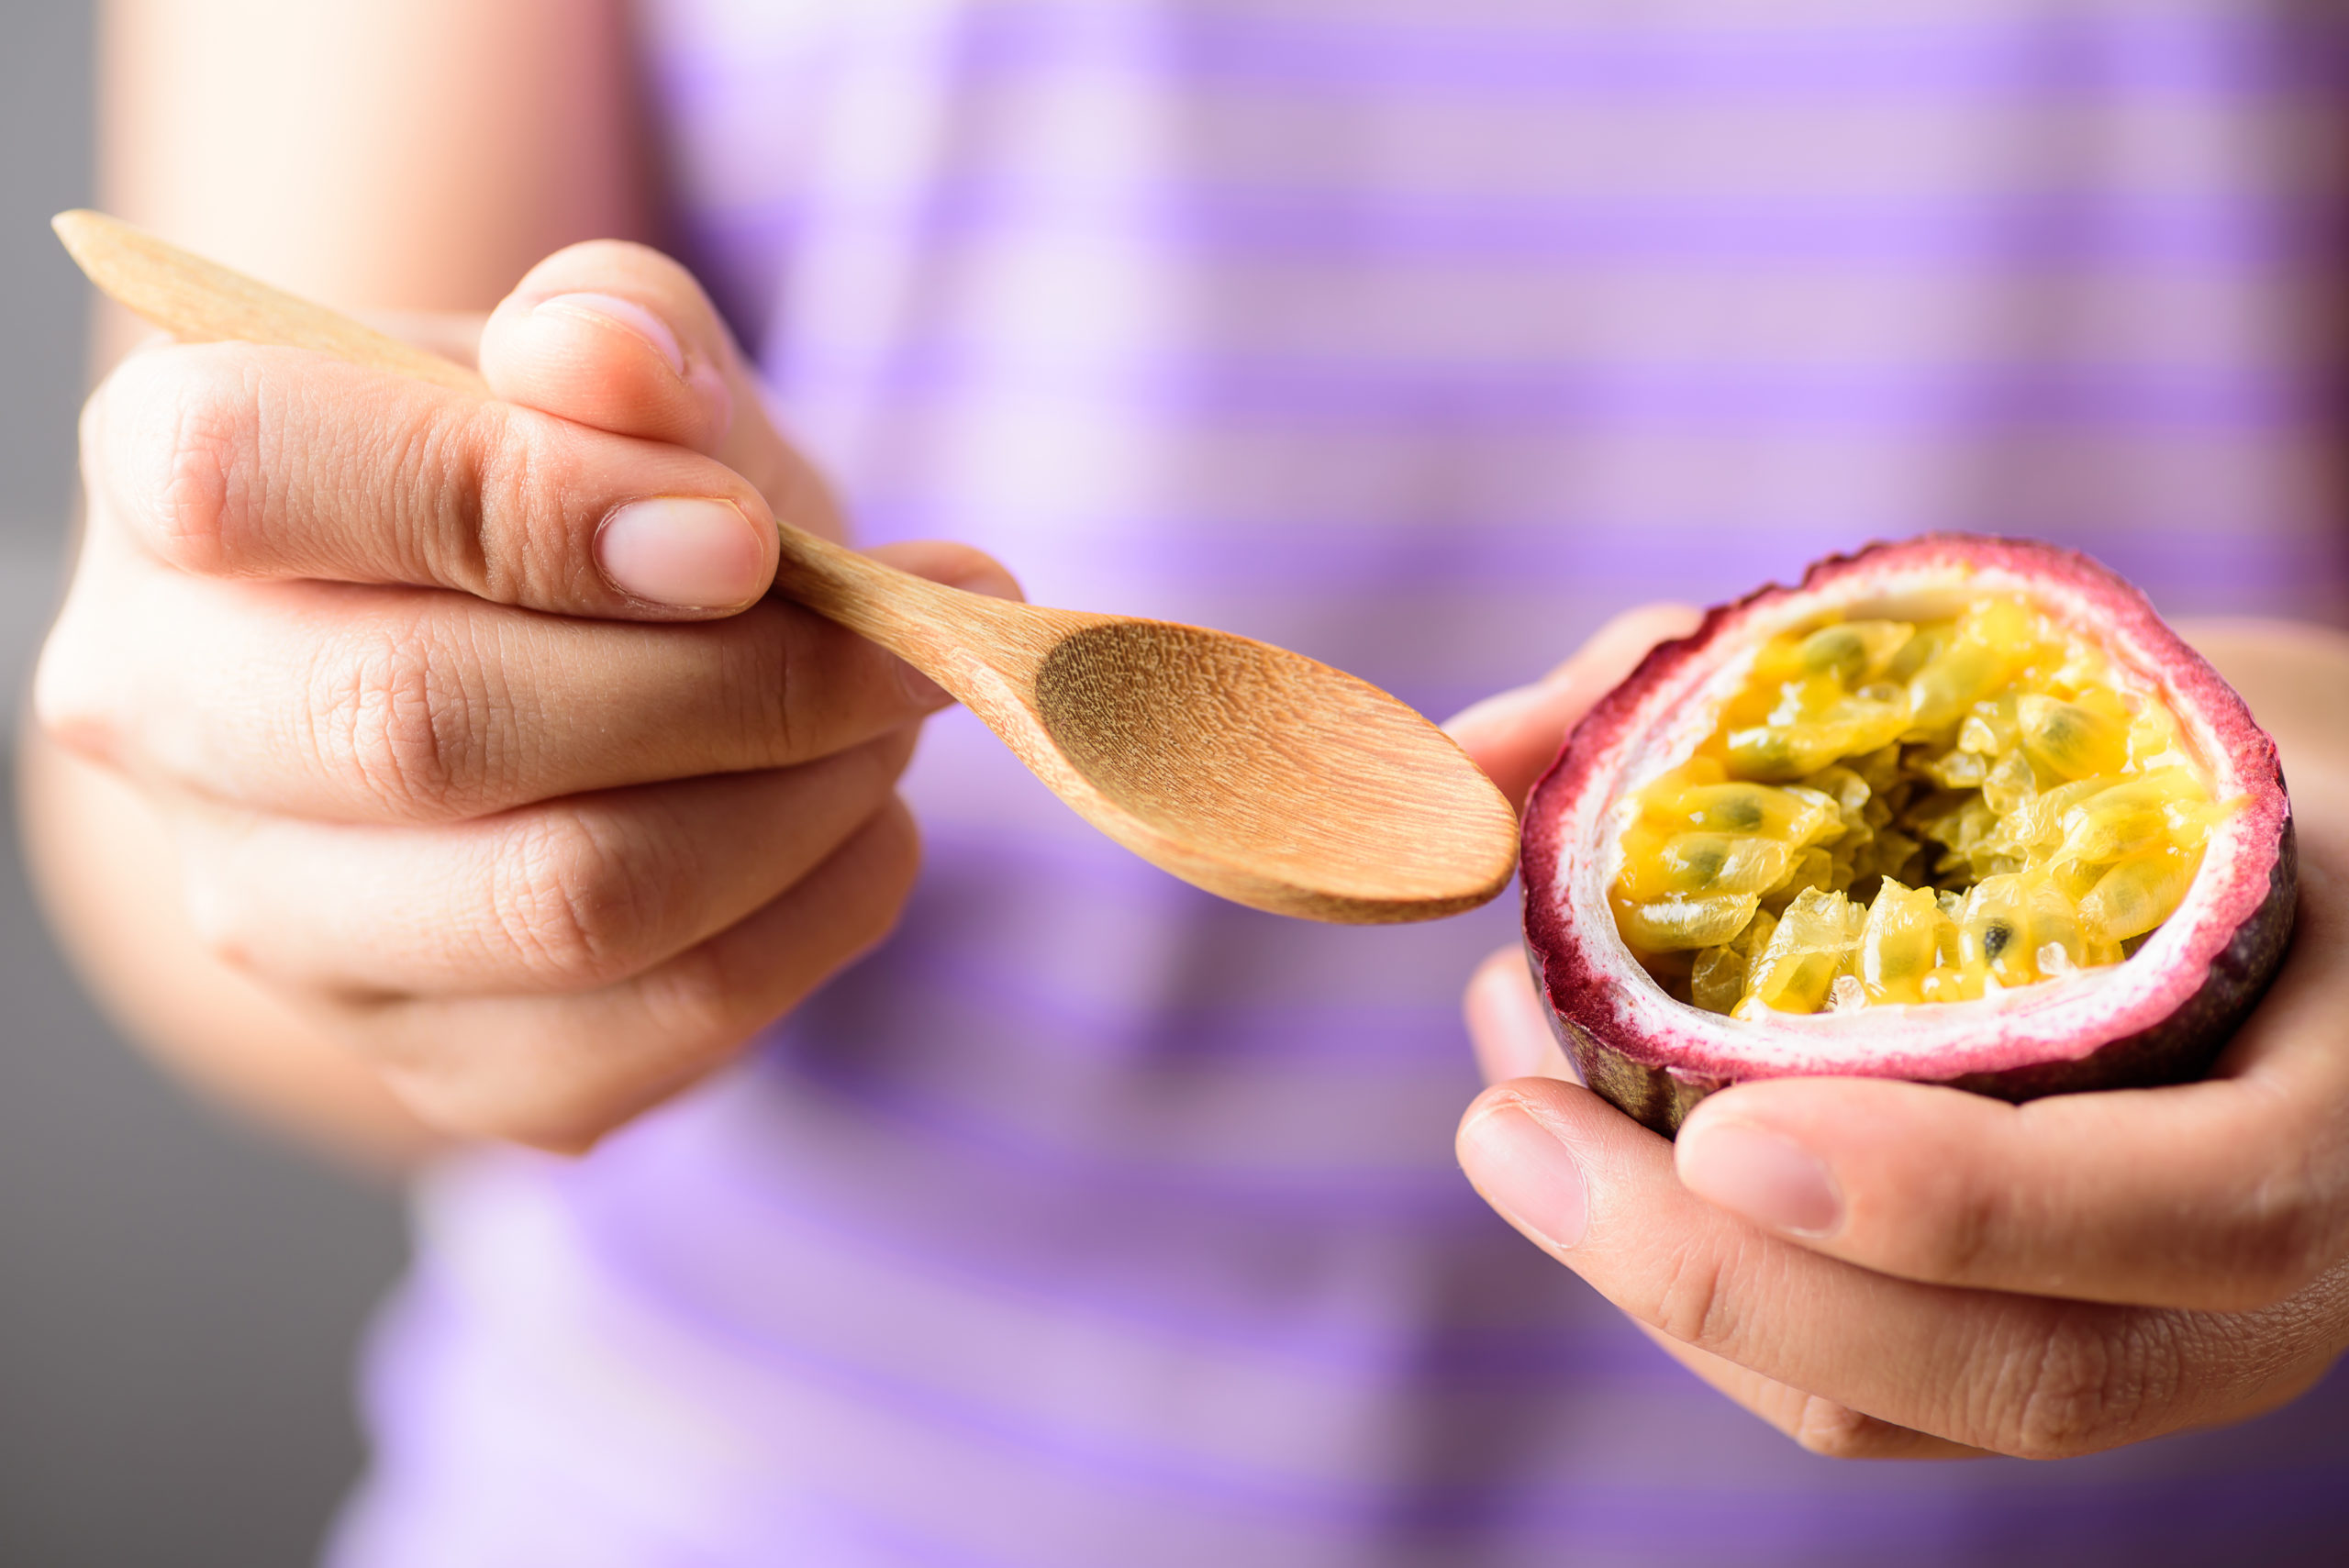 Hand holding spoon for eating passion fruit